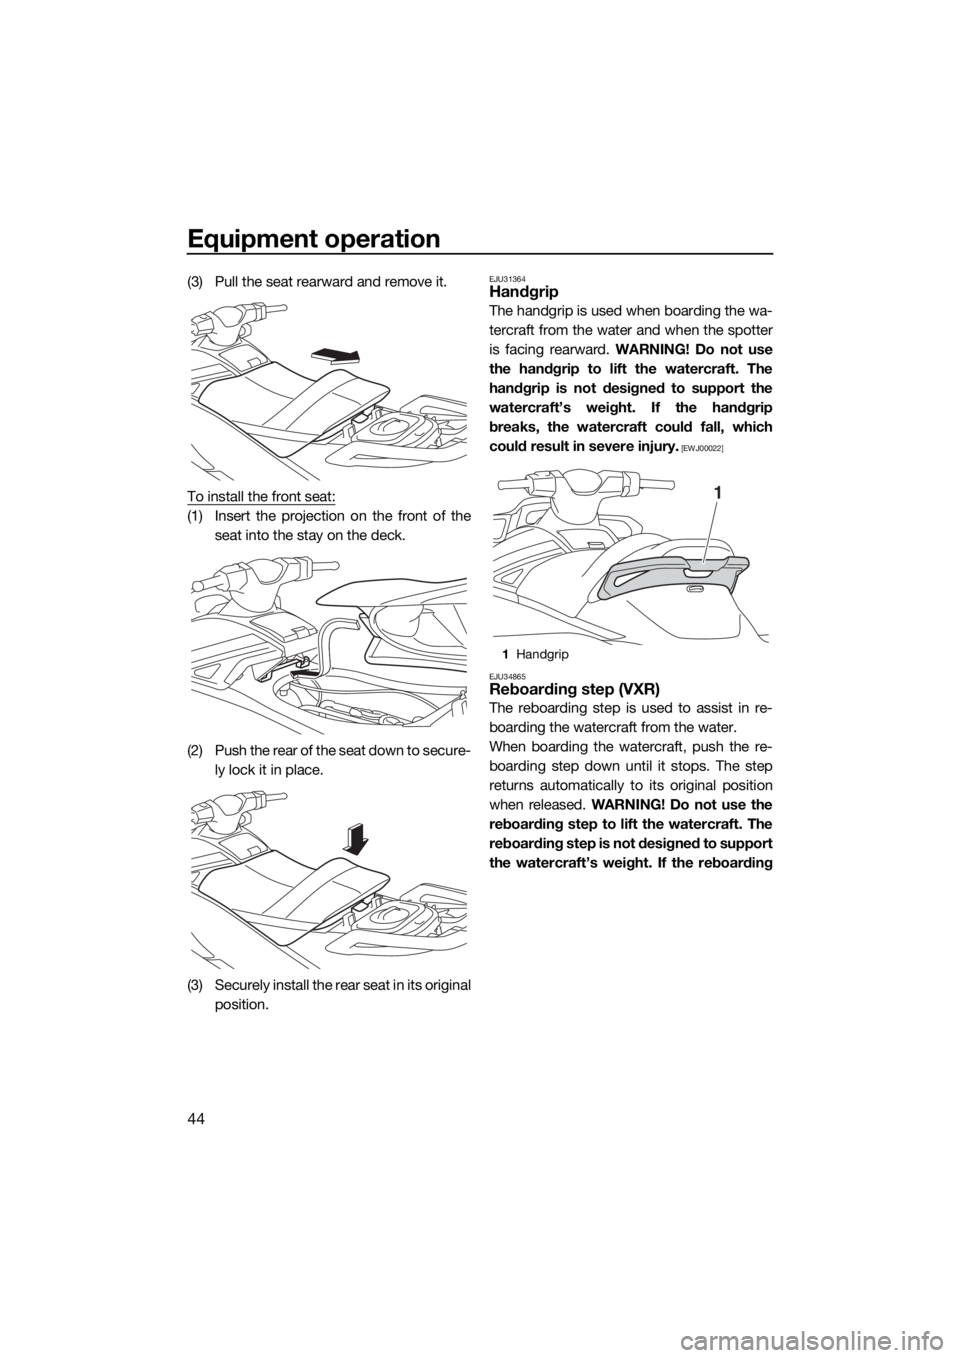 YAMAHA VXS 2015  Owners Manual Equipment operation
44
(3) Pull the seat rearward and remove it.
To install the front seat:
(1) Insert the projection on the front of the
seat into the stay on the deck.
(2) Push the rear of the seat 